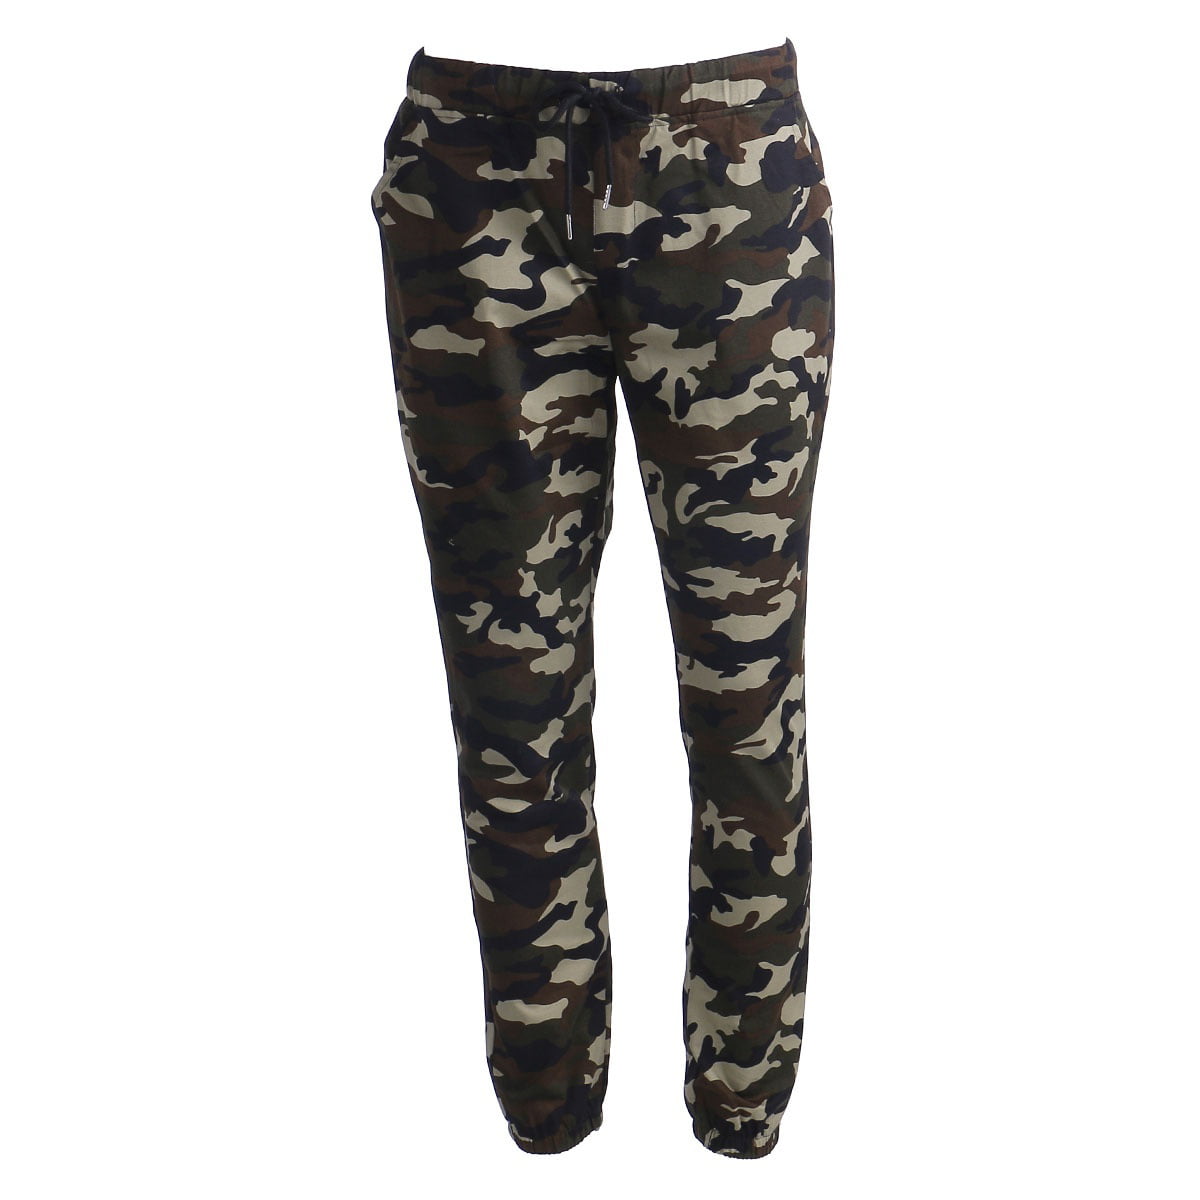 Men Camouflage Trousers, Casual Elastic Waist Printed Pattern Jogger ...